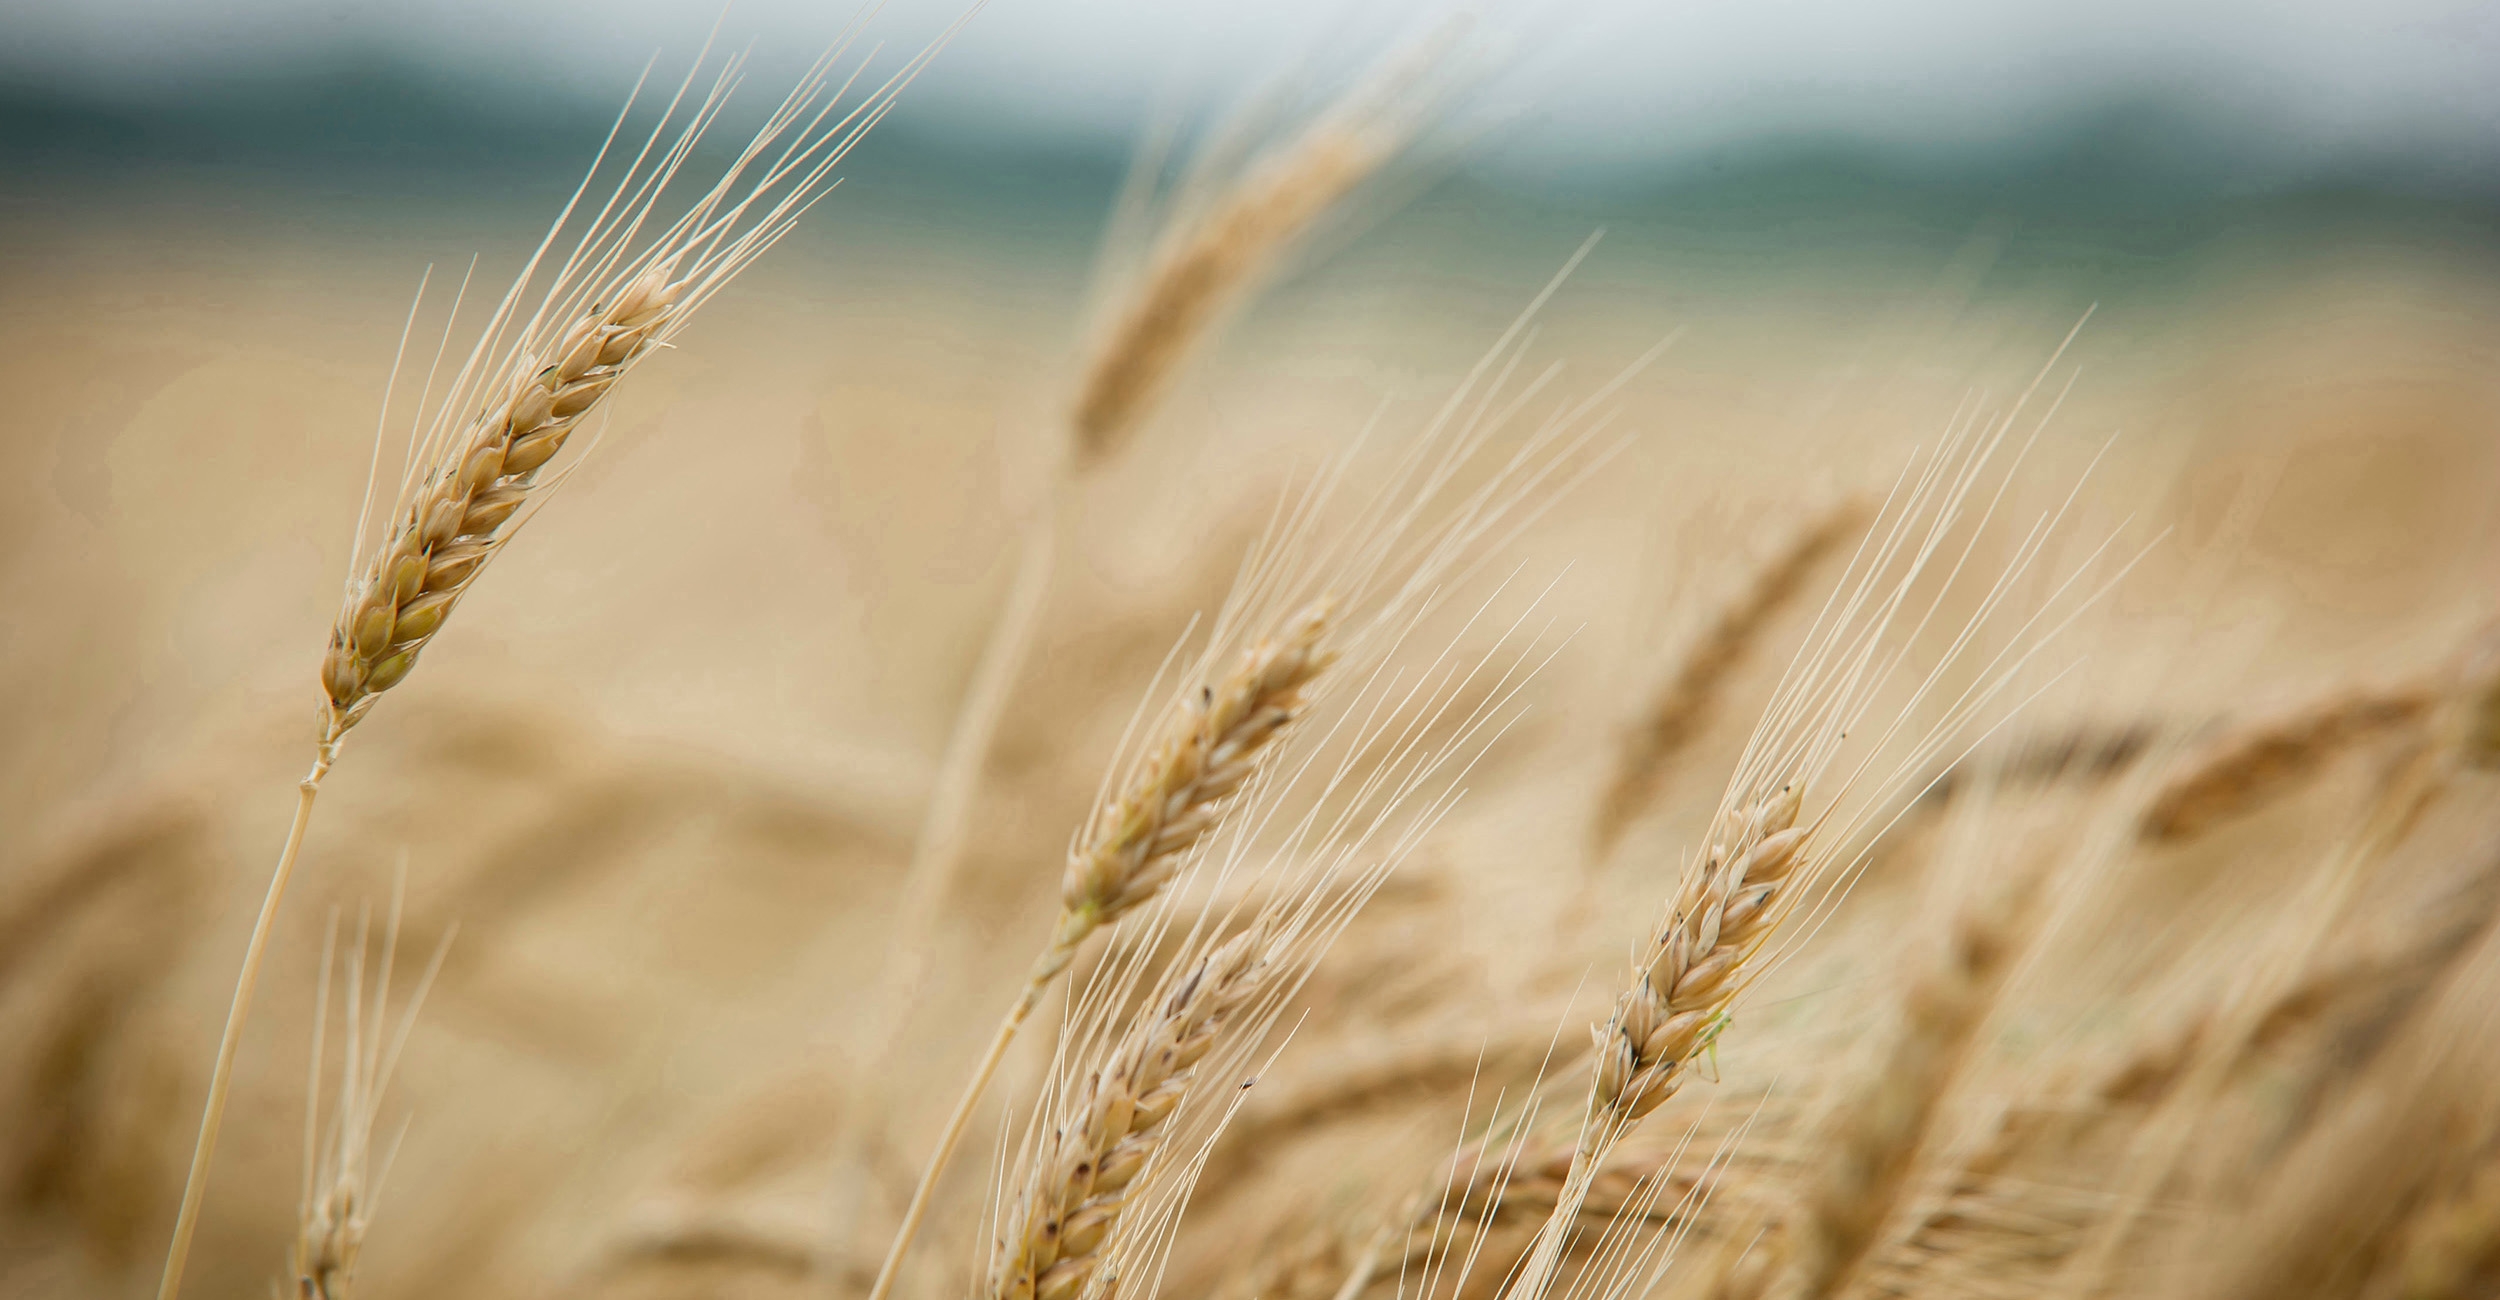 Photo of golden wheat swaying in the wind near harvest time.